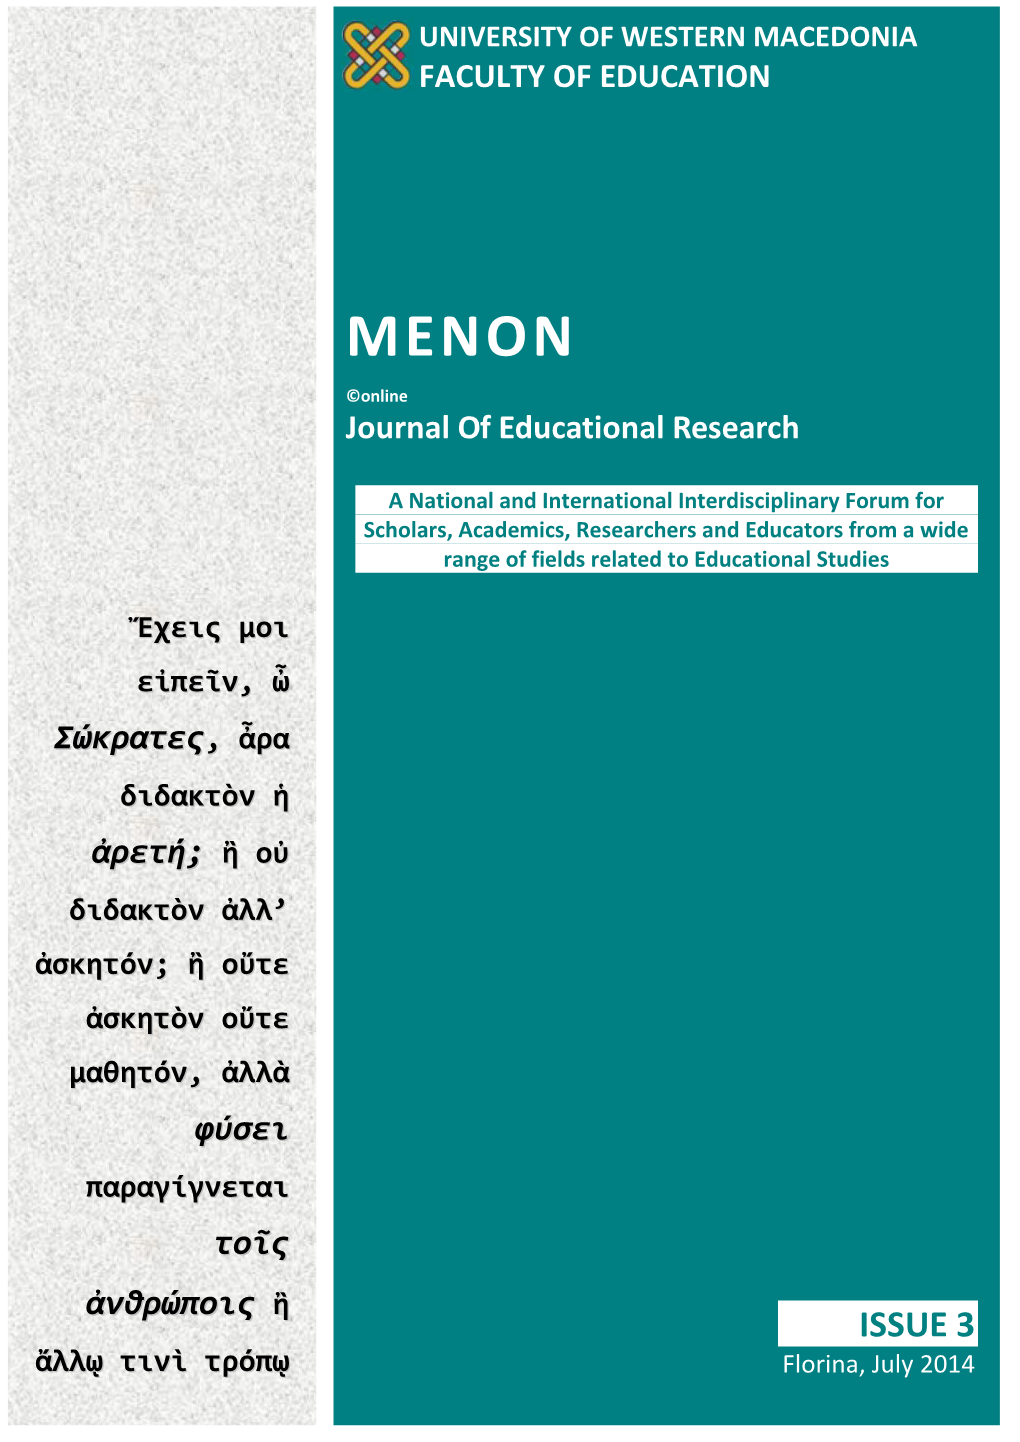 MENON ©Online Journal of Educational Research